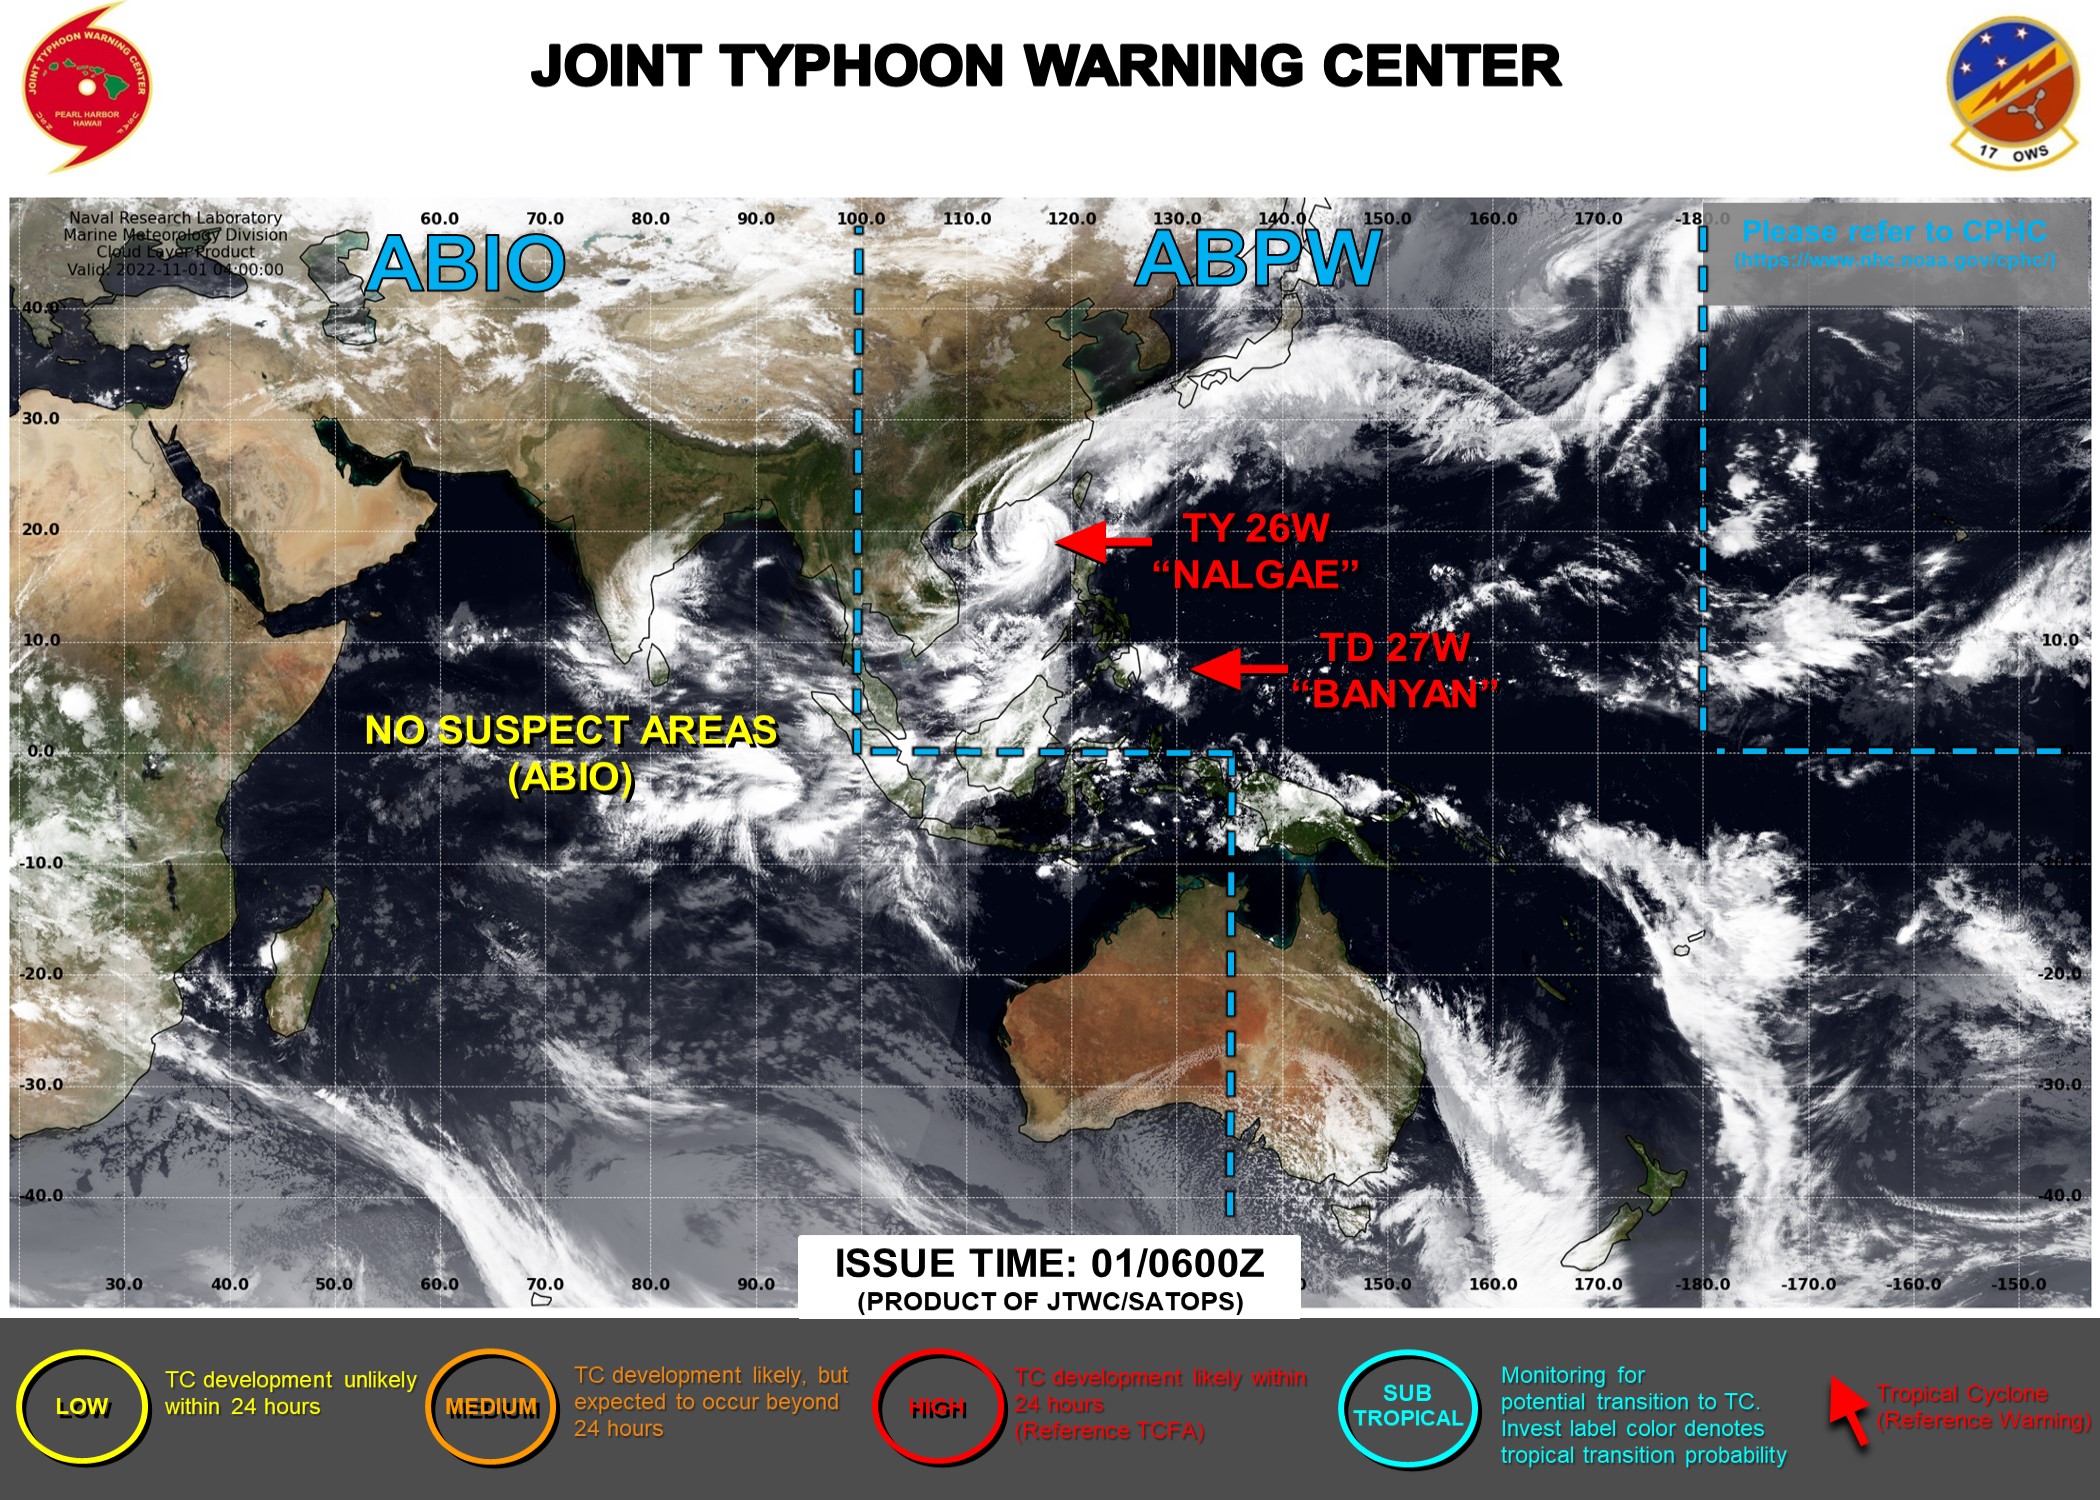 JTWC IS ISSUING 6HOURLY WARNINGS AND 3HOURLY SATELLITE BULLETINS ON 26W(NALGAE). 3HOURLY SATELLITE BULLETINS ARE STILL ISSUED ON THE REMNANTS OF 27W(BANYAN).